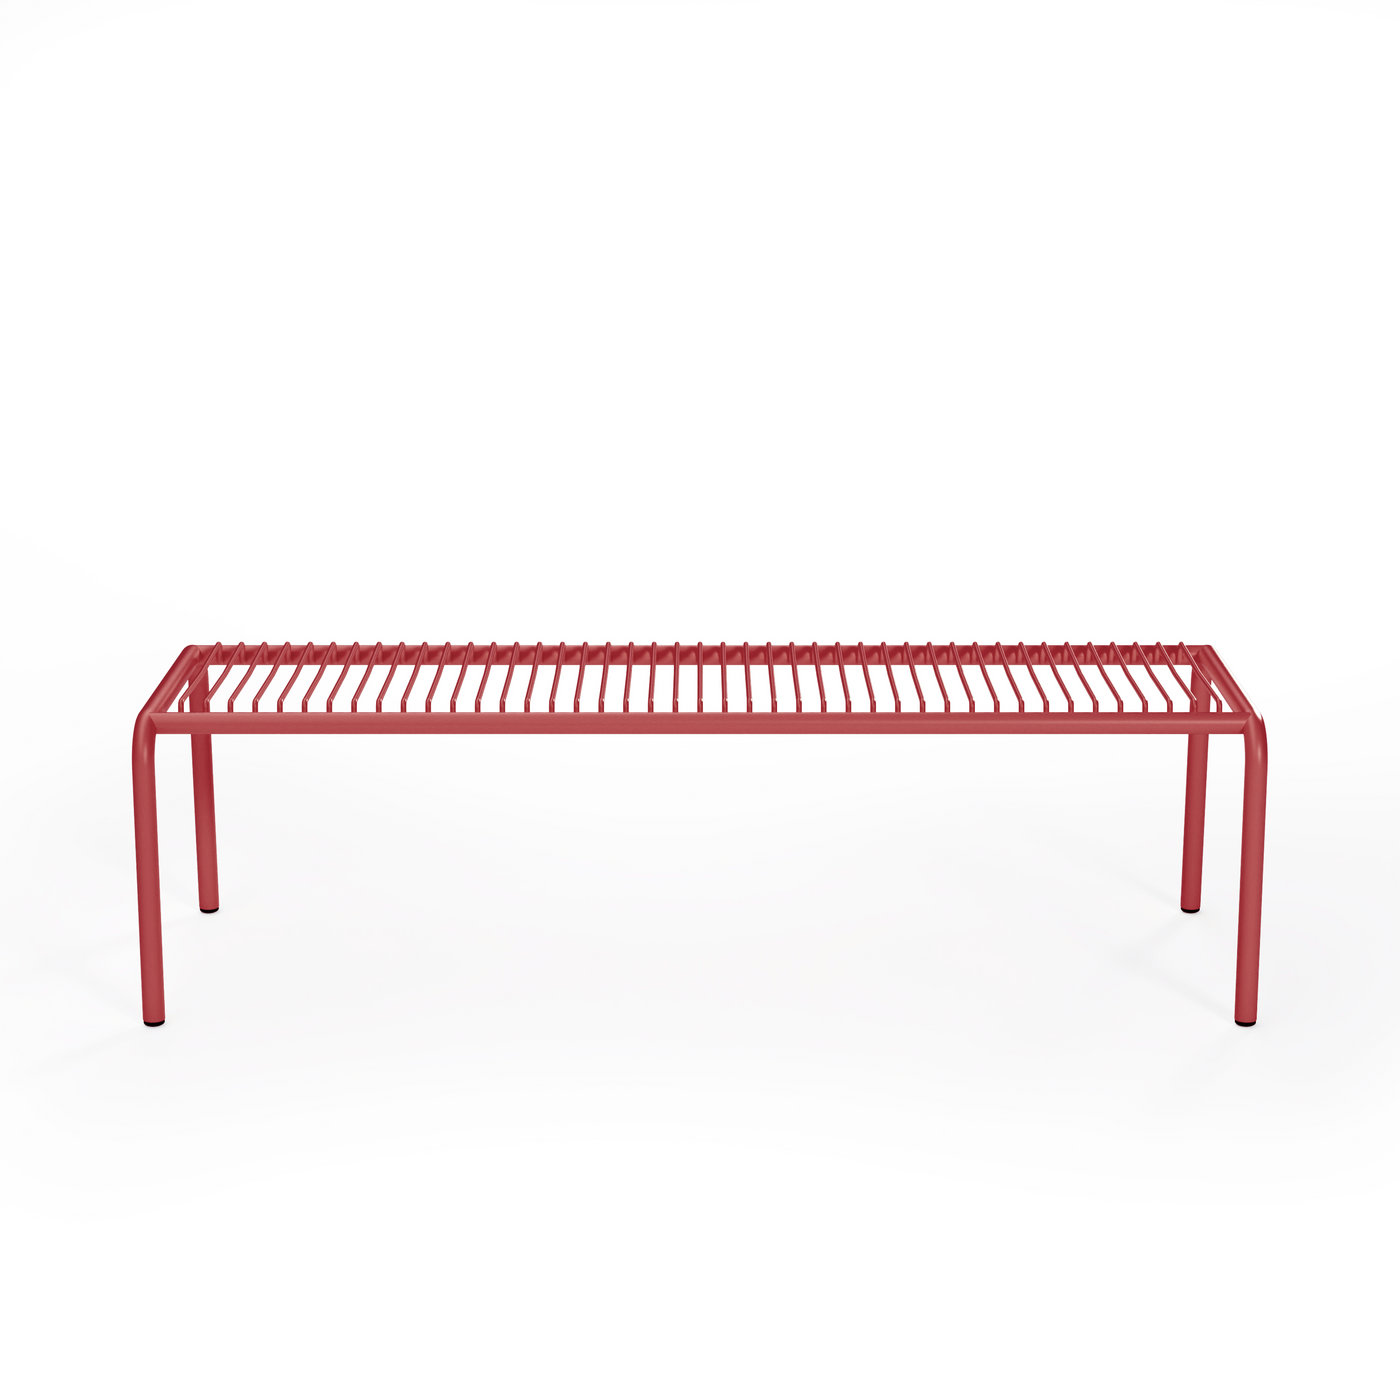 Frame Metal Garden Bench, 3 Seater, Berry Red